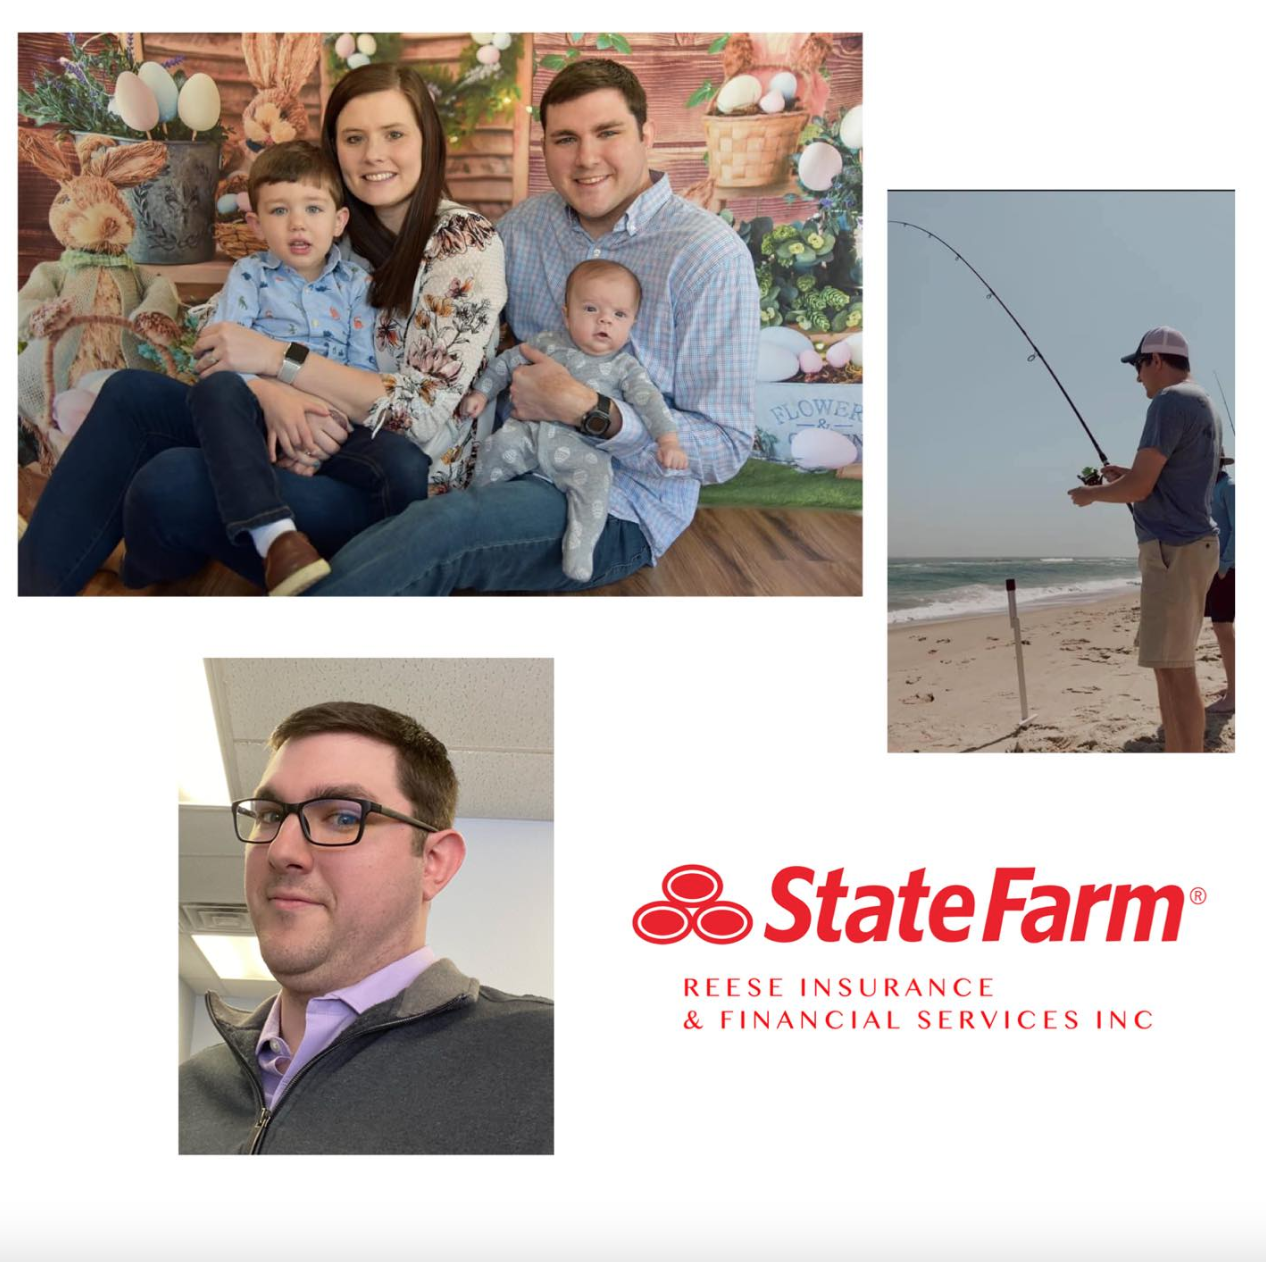 Say hello to our team member of the week Josh Bailey. Josh currently serves in our Selbyville location helping customers with everything from Car, Home, and Flood insurance to Life and Disability insurance.